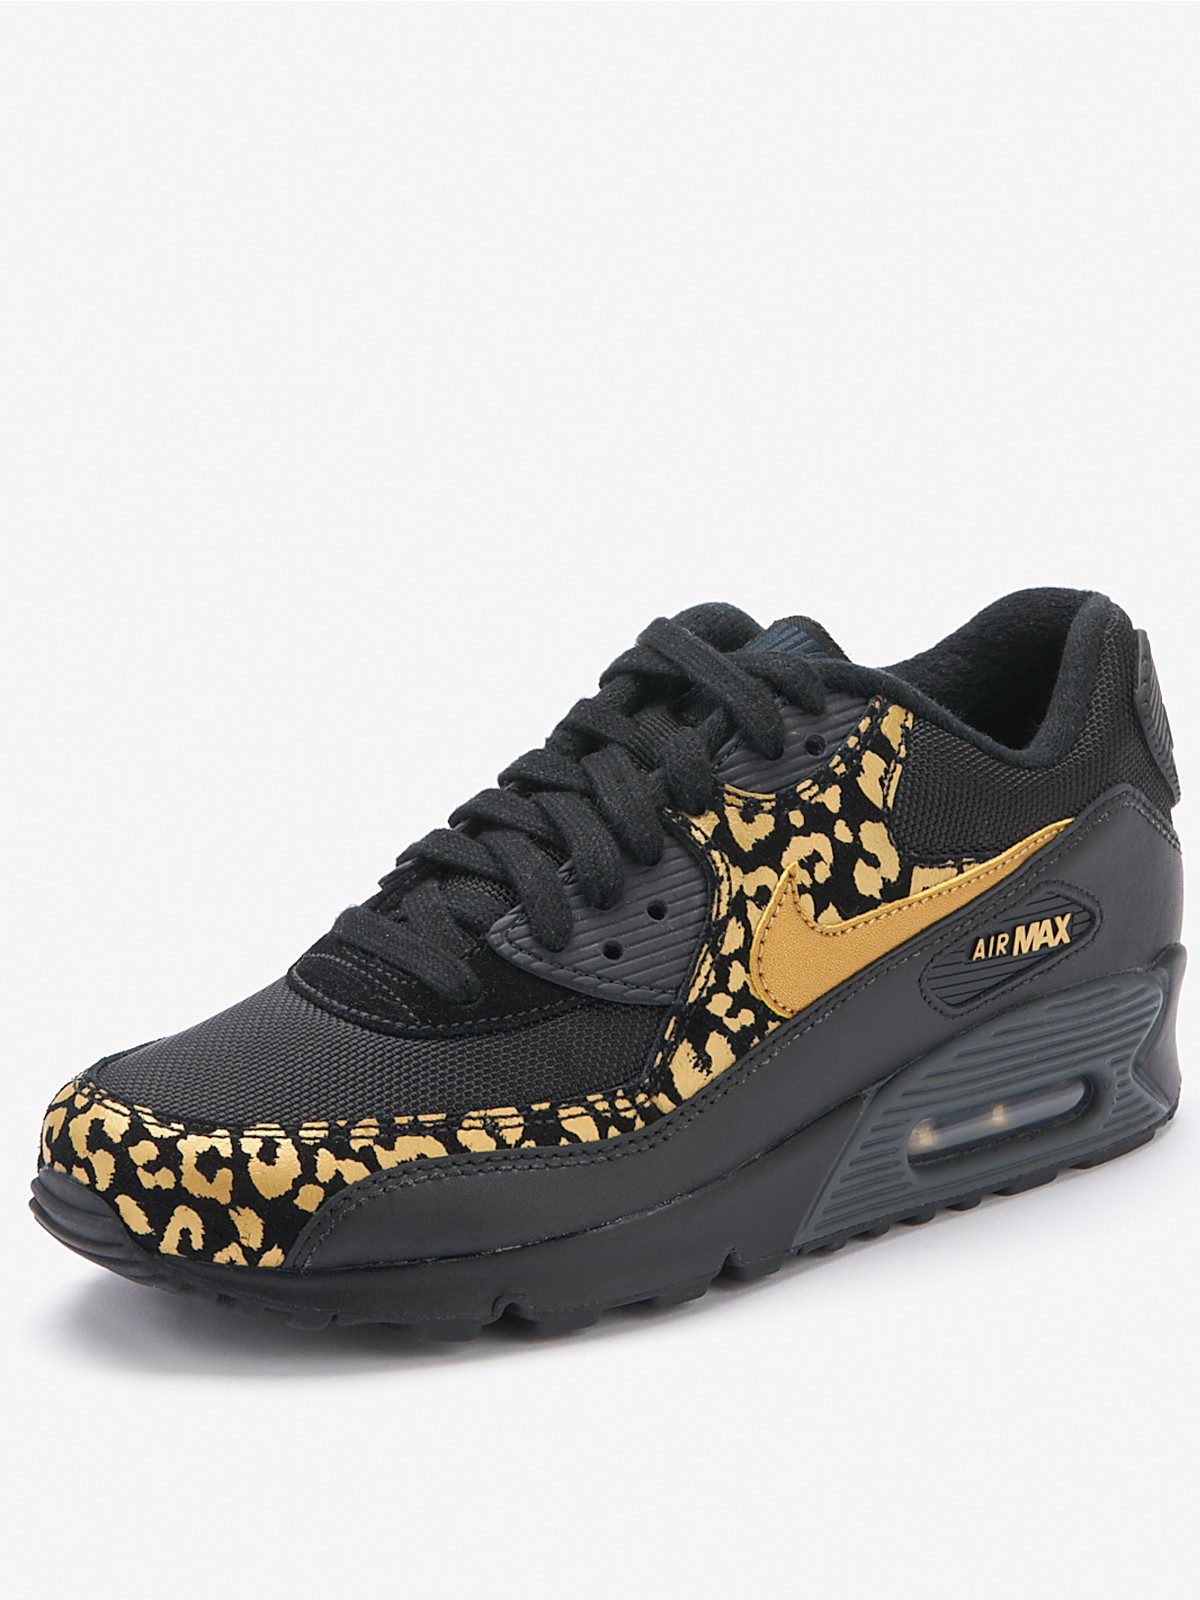 Nike Nike Air Max 90 80 Trainers in Gold (black/gold) Lyst